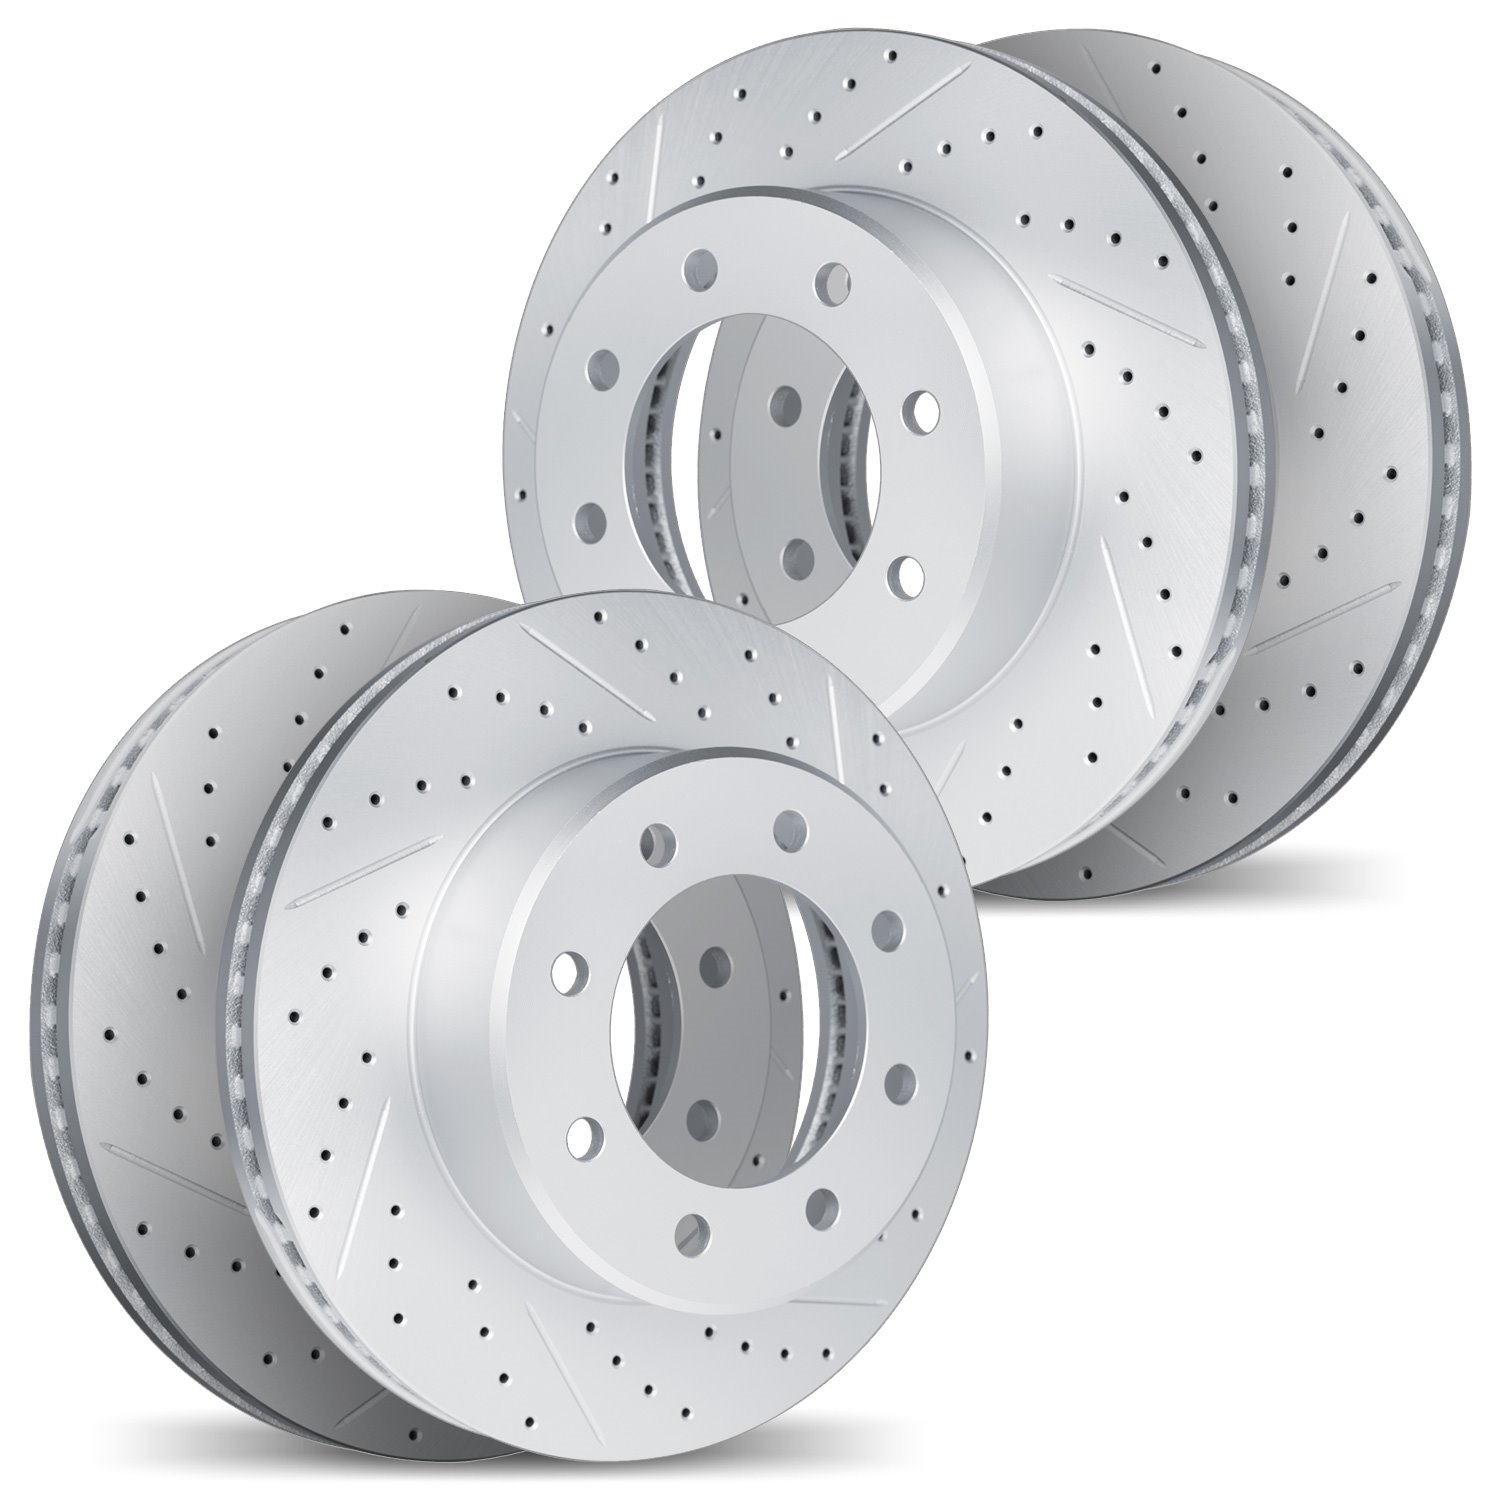 2004-48062 Geoperformance Drilled/Slotted Brake Rotors, Fits Select GM, Position: Front and Rear